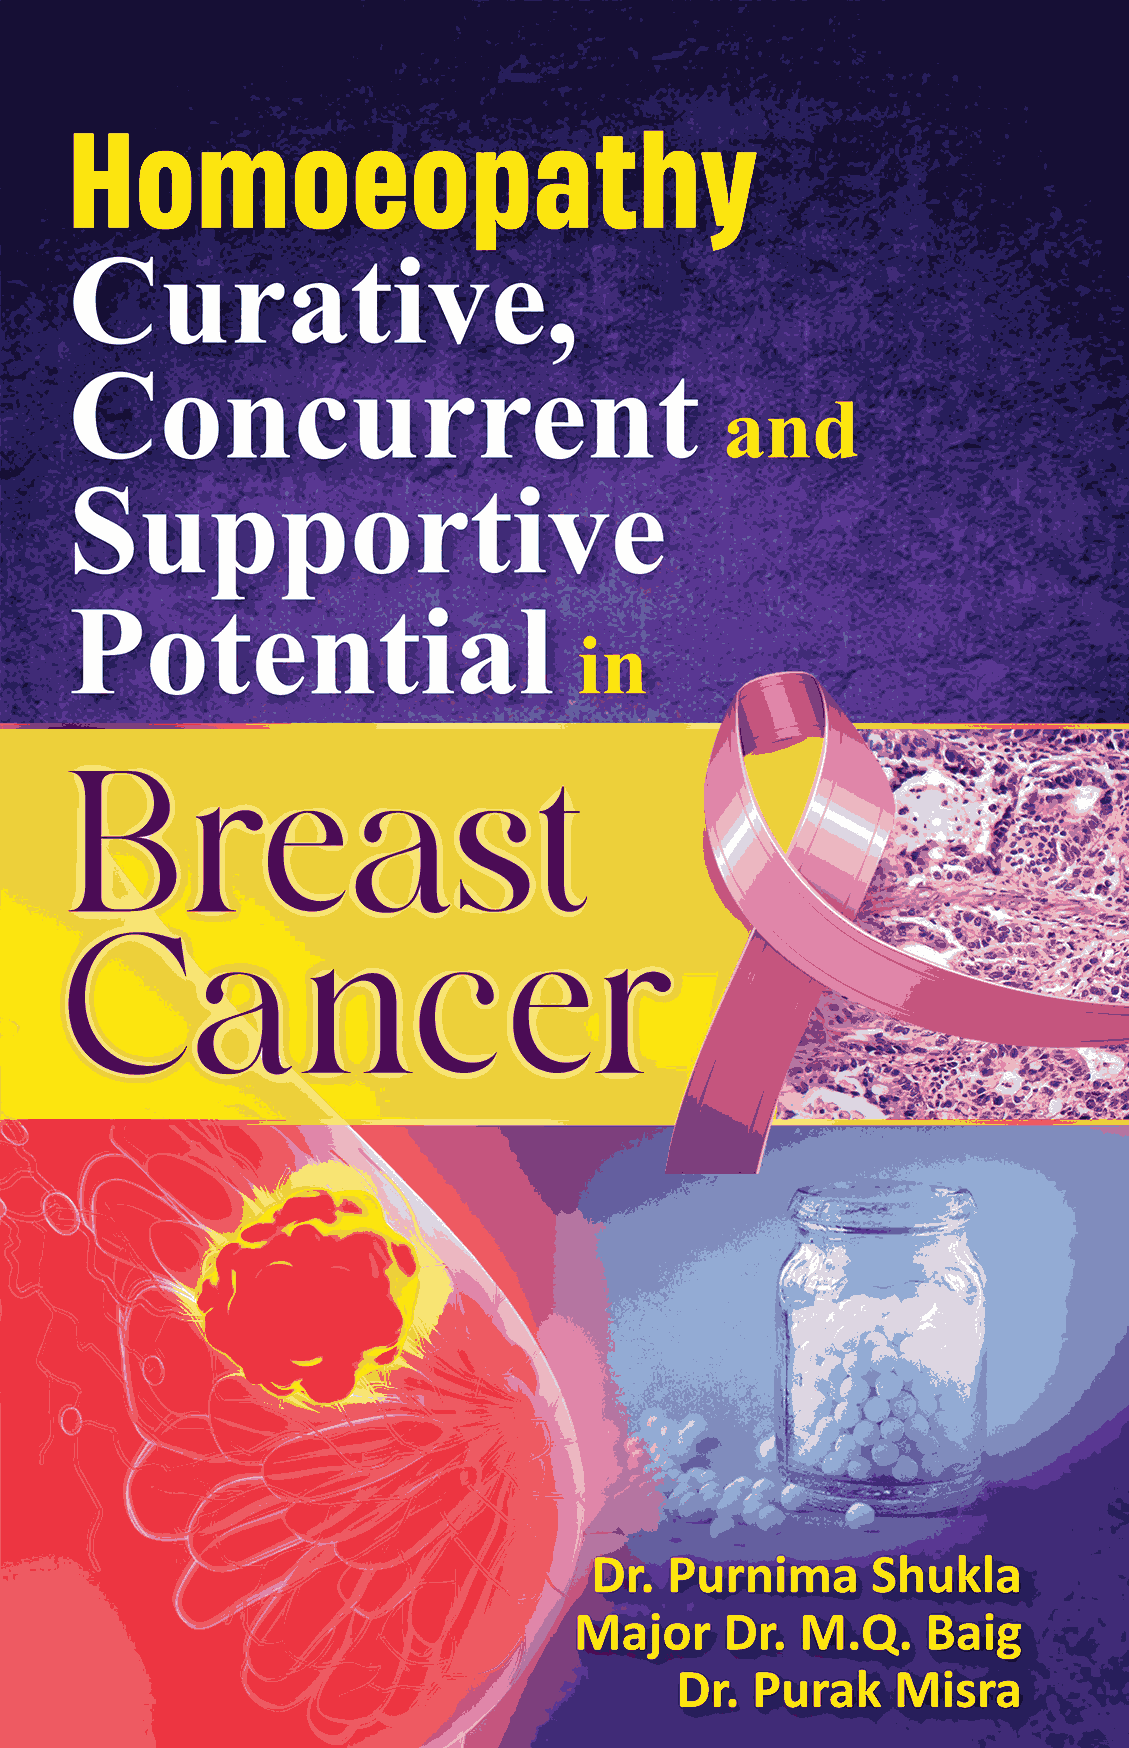 Best books for breast cancer patients